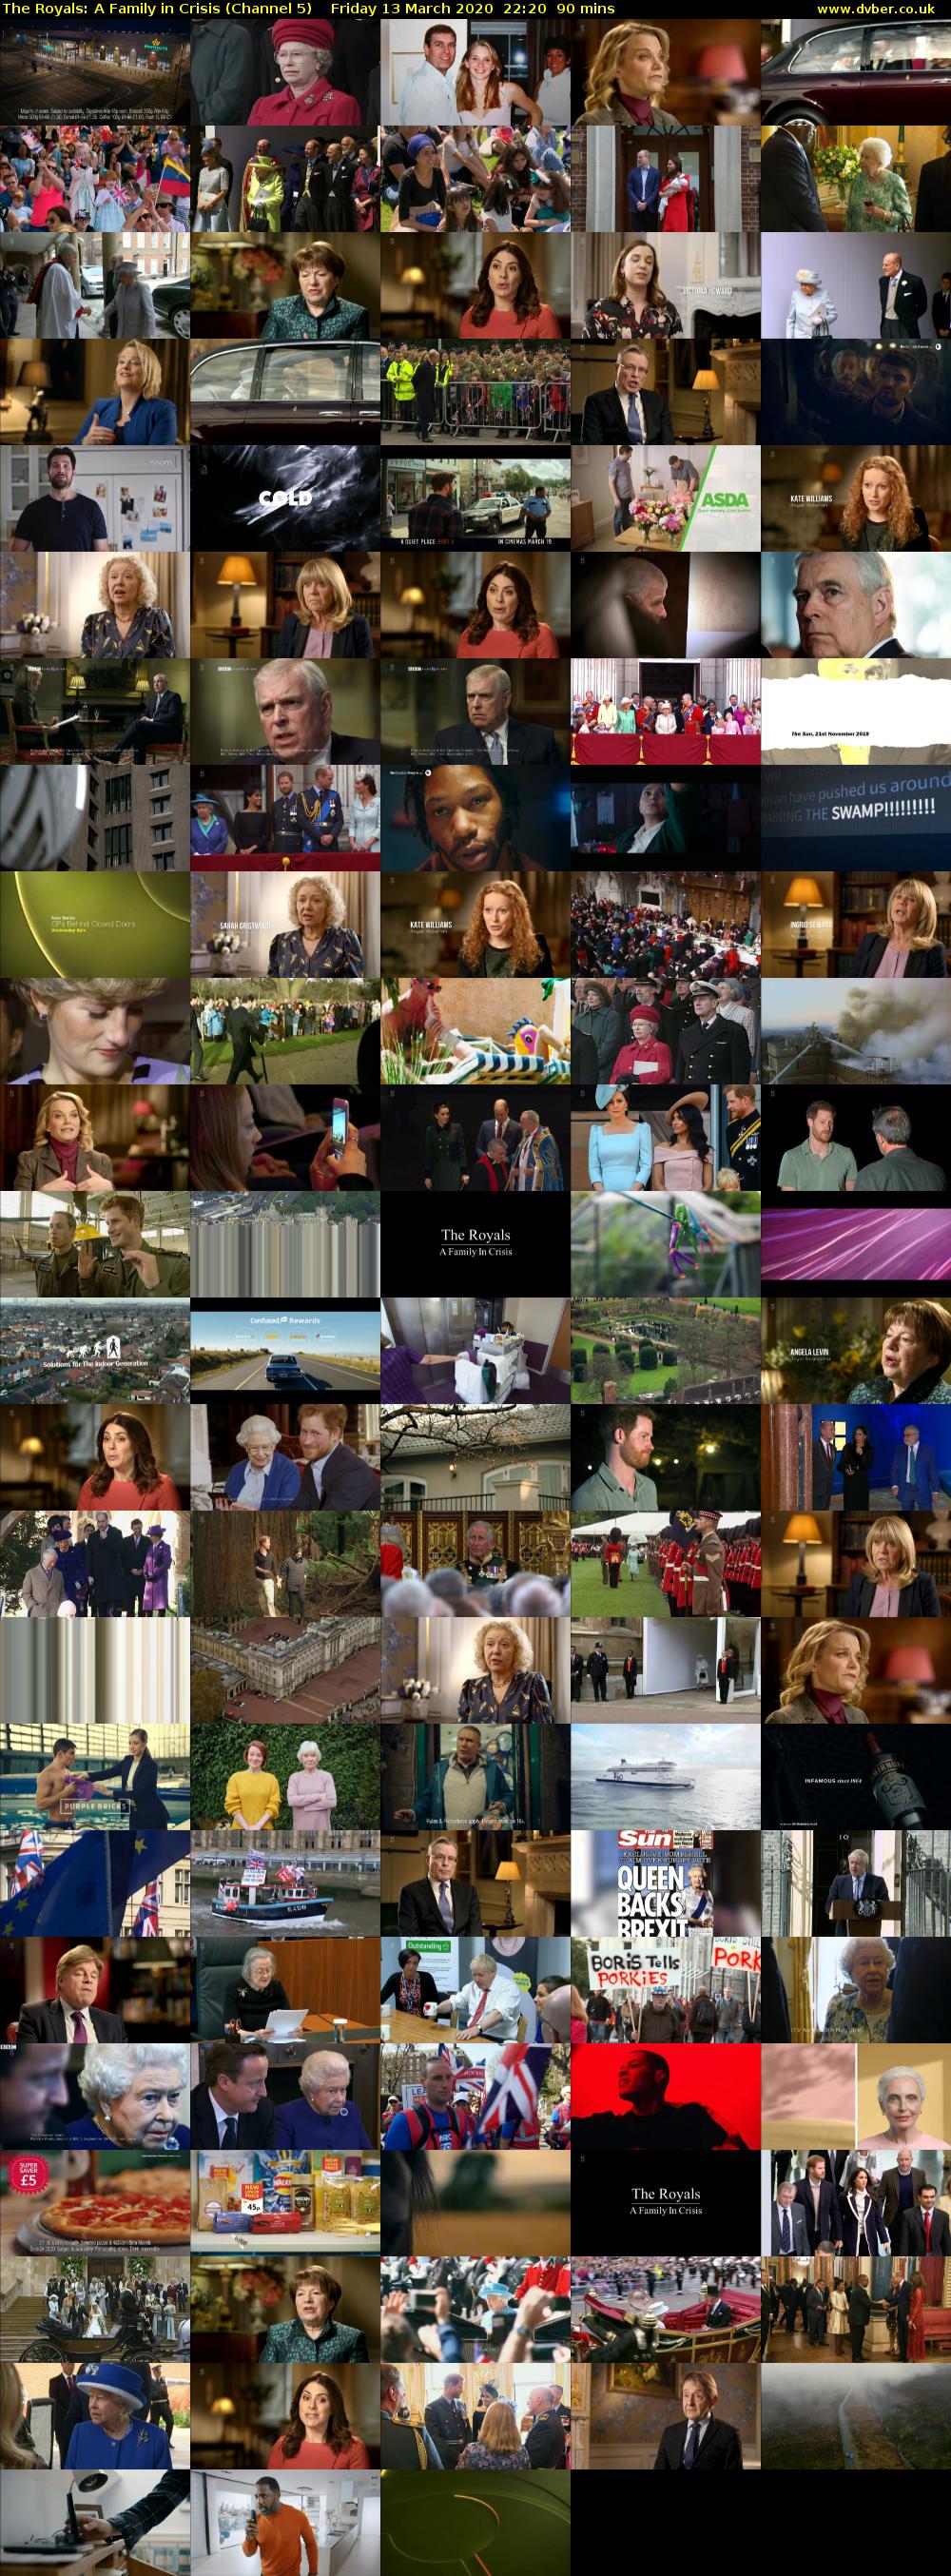 The Royals: A Family in Crisis (Channel 5) Friday 13 March 2020 22:20 - 23:50